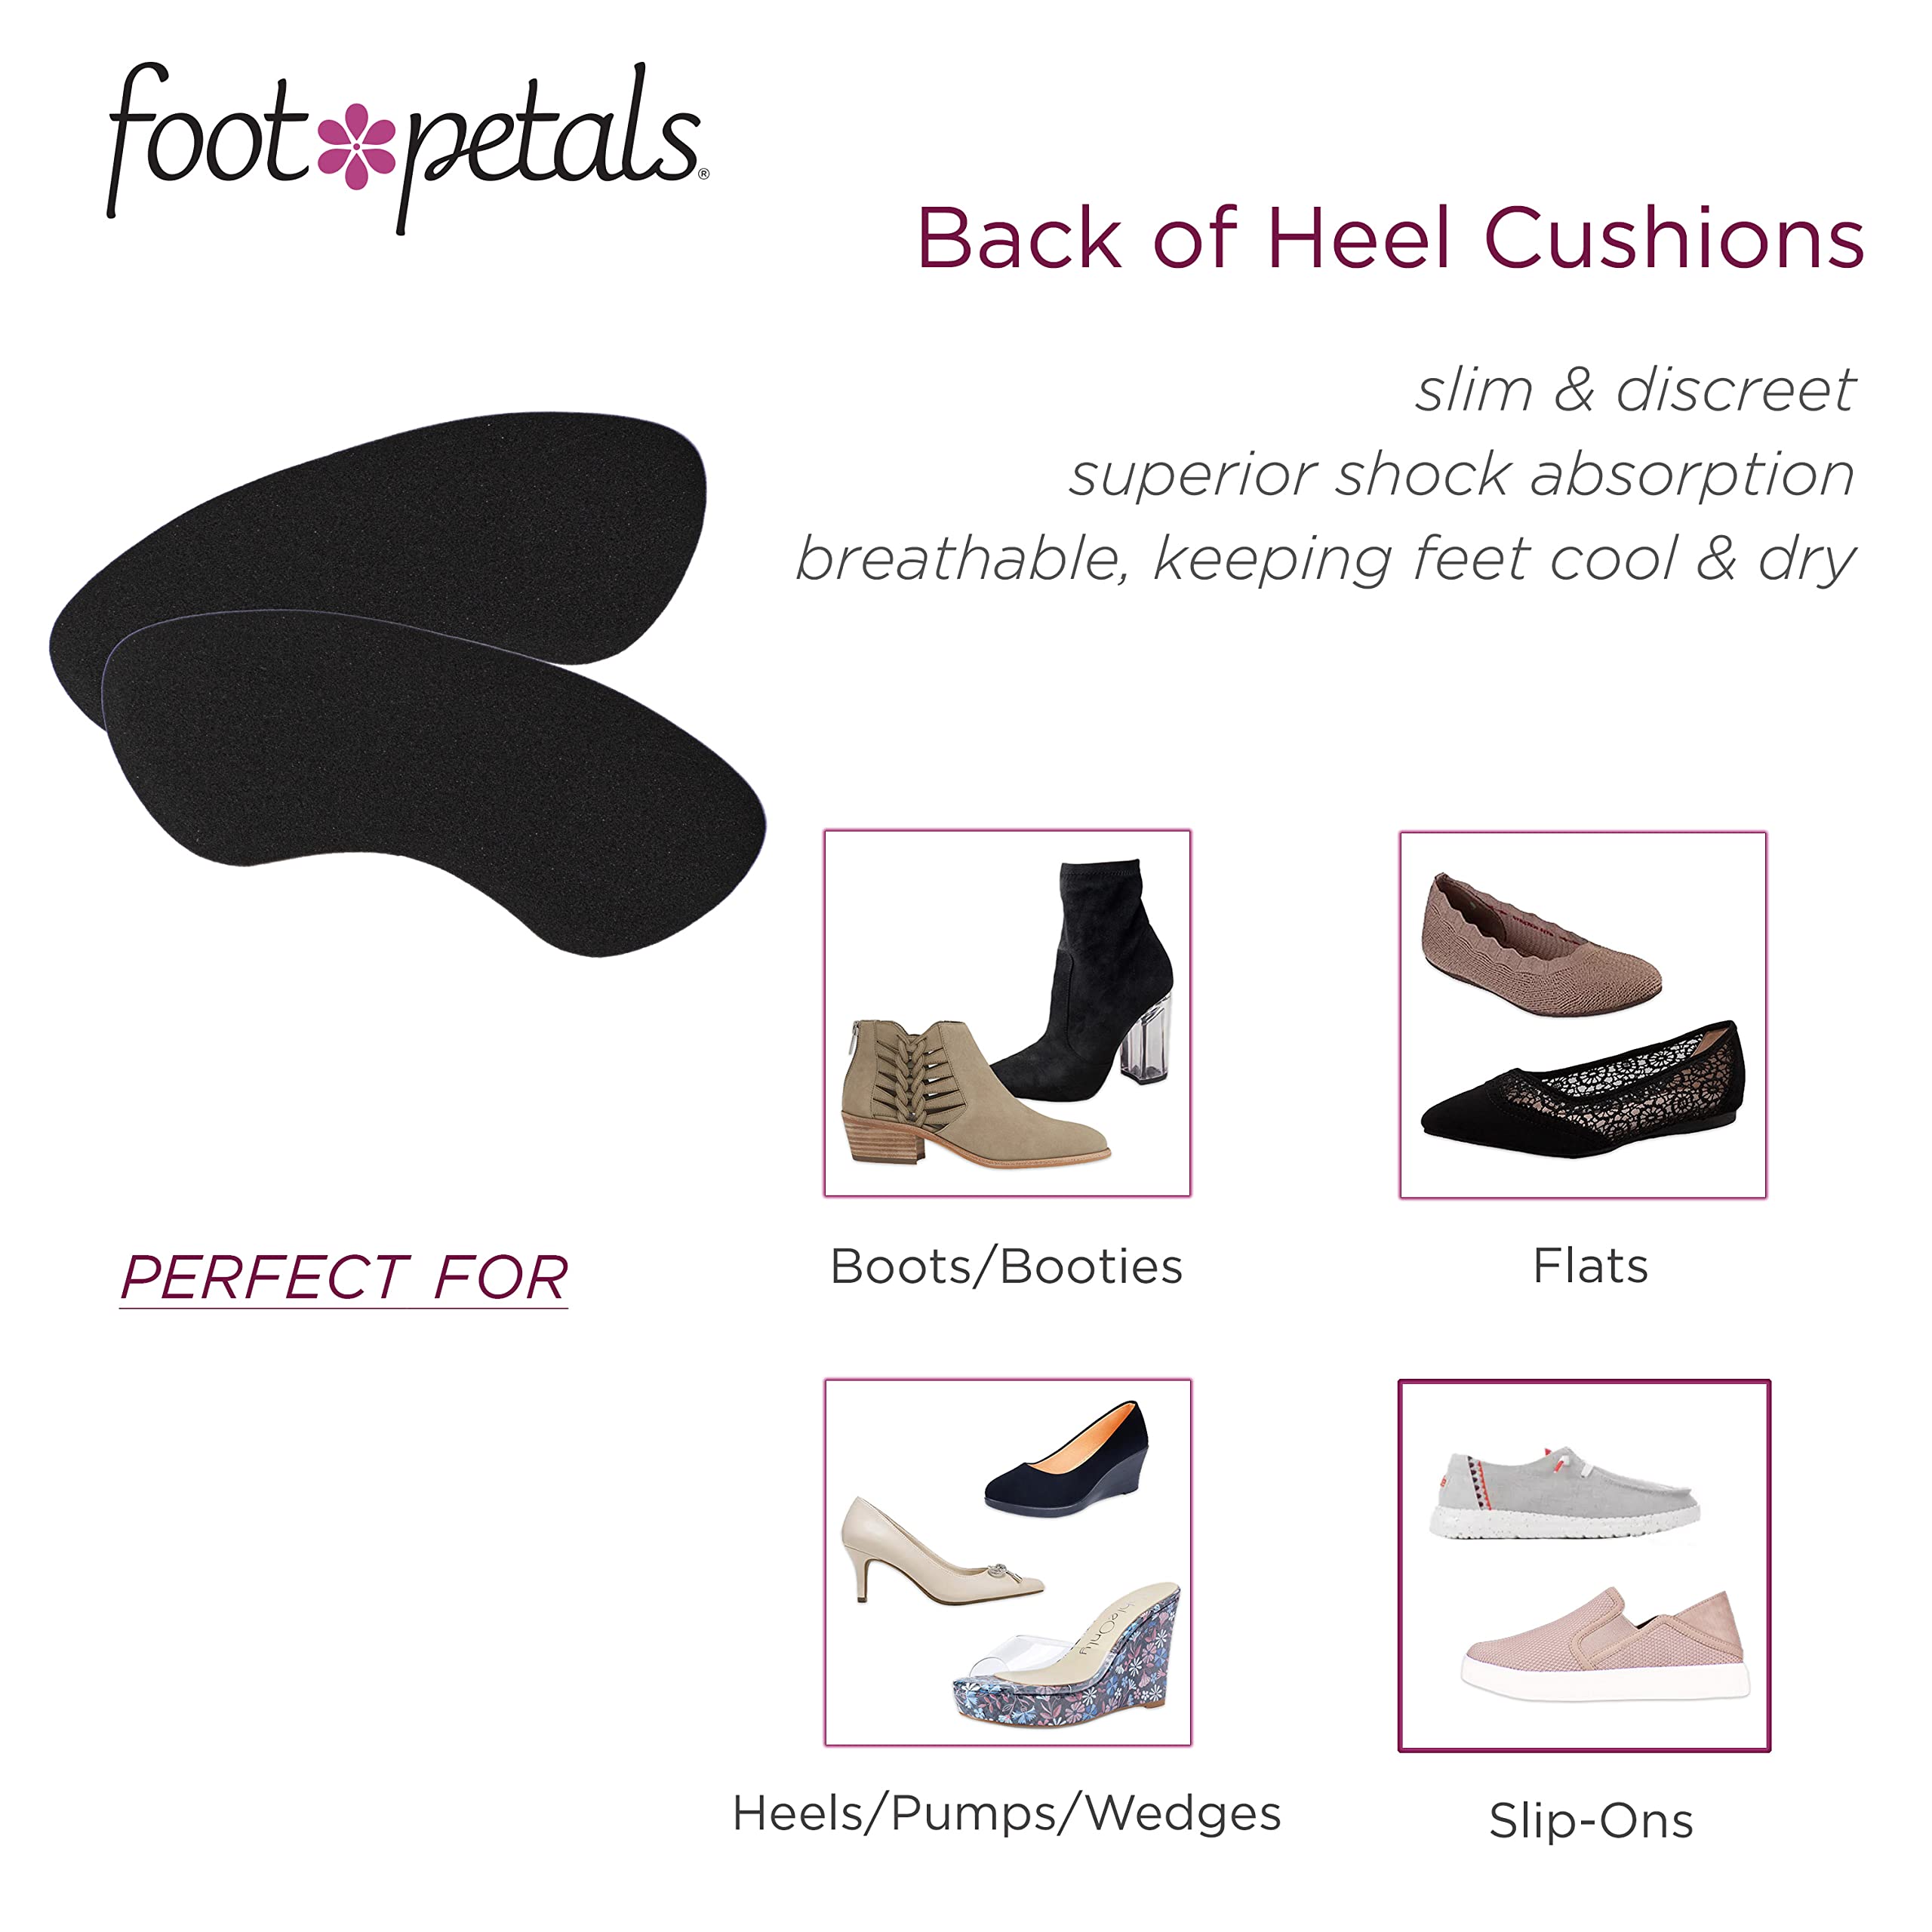 Foot Petals Women's Rounded Back Cushion Inserts Protectors, Comfortable Heel Grip for Pain Relief and Sizing, Black, One